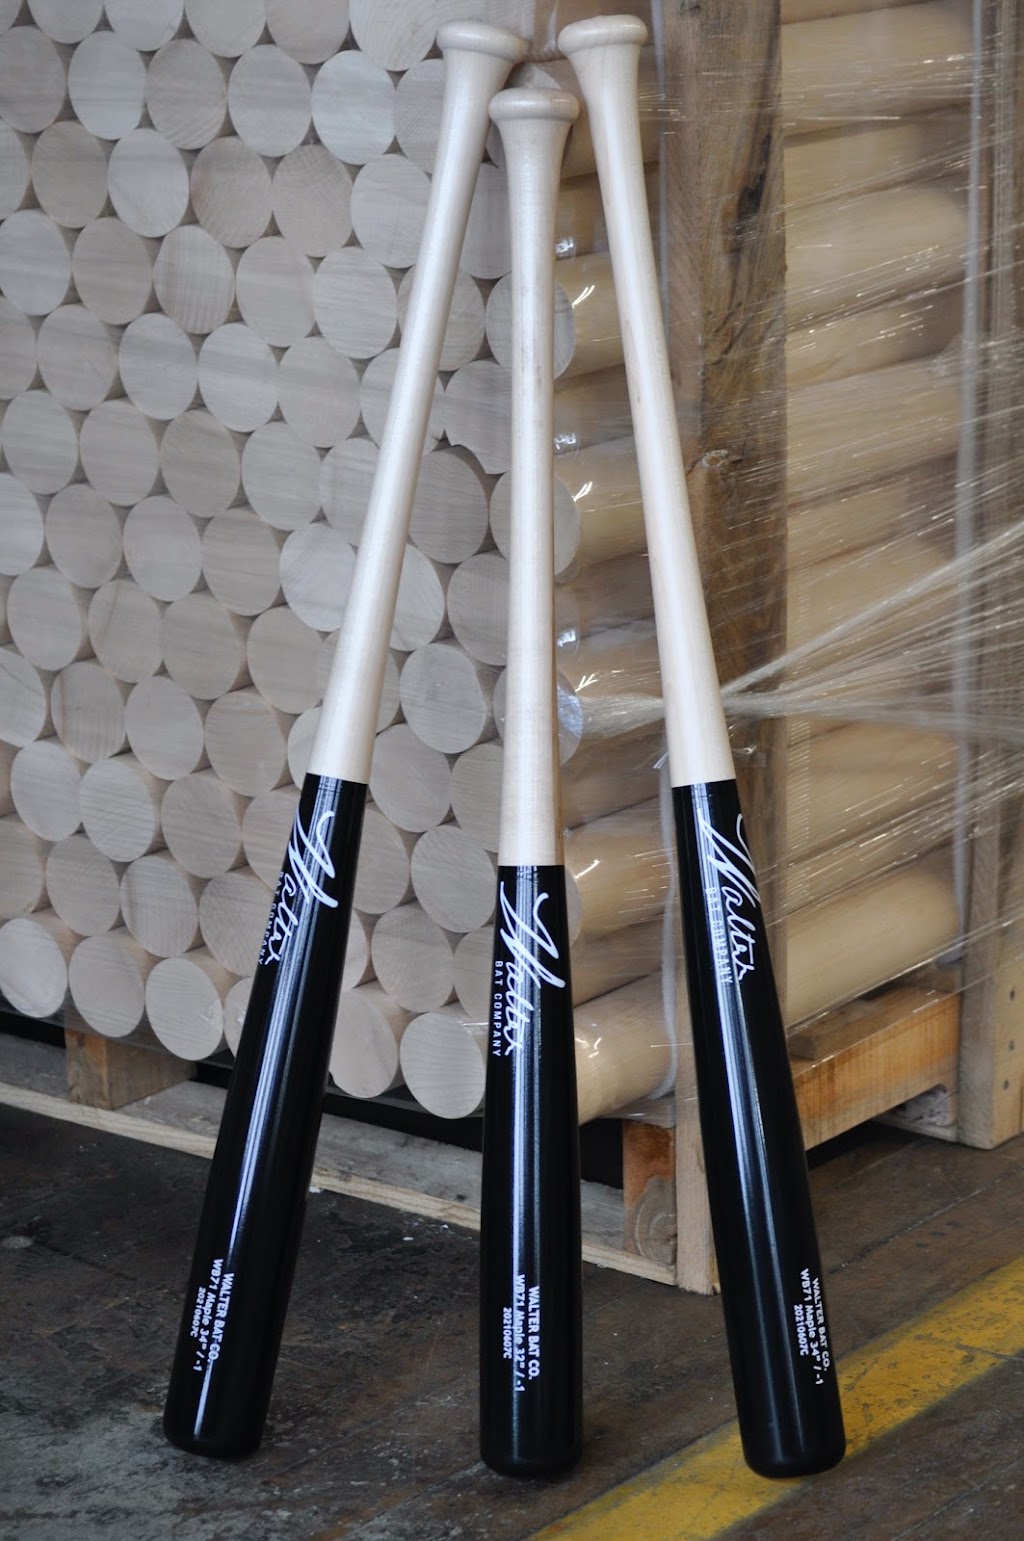 Walter Bat Company | On-line Only, 1 Pine St Ext, Nashua, NH 03060 | Phone: (603) 514-0681